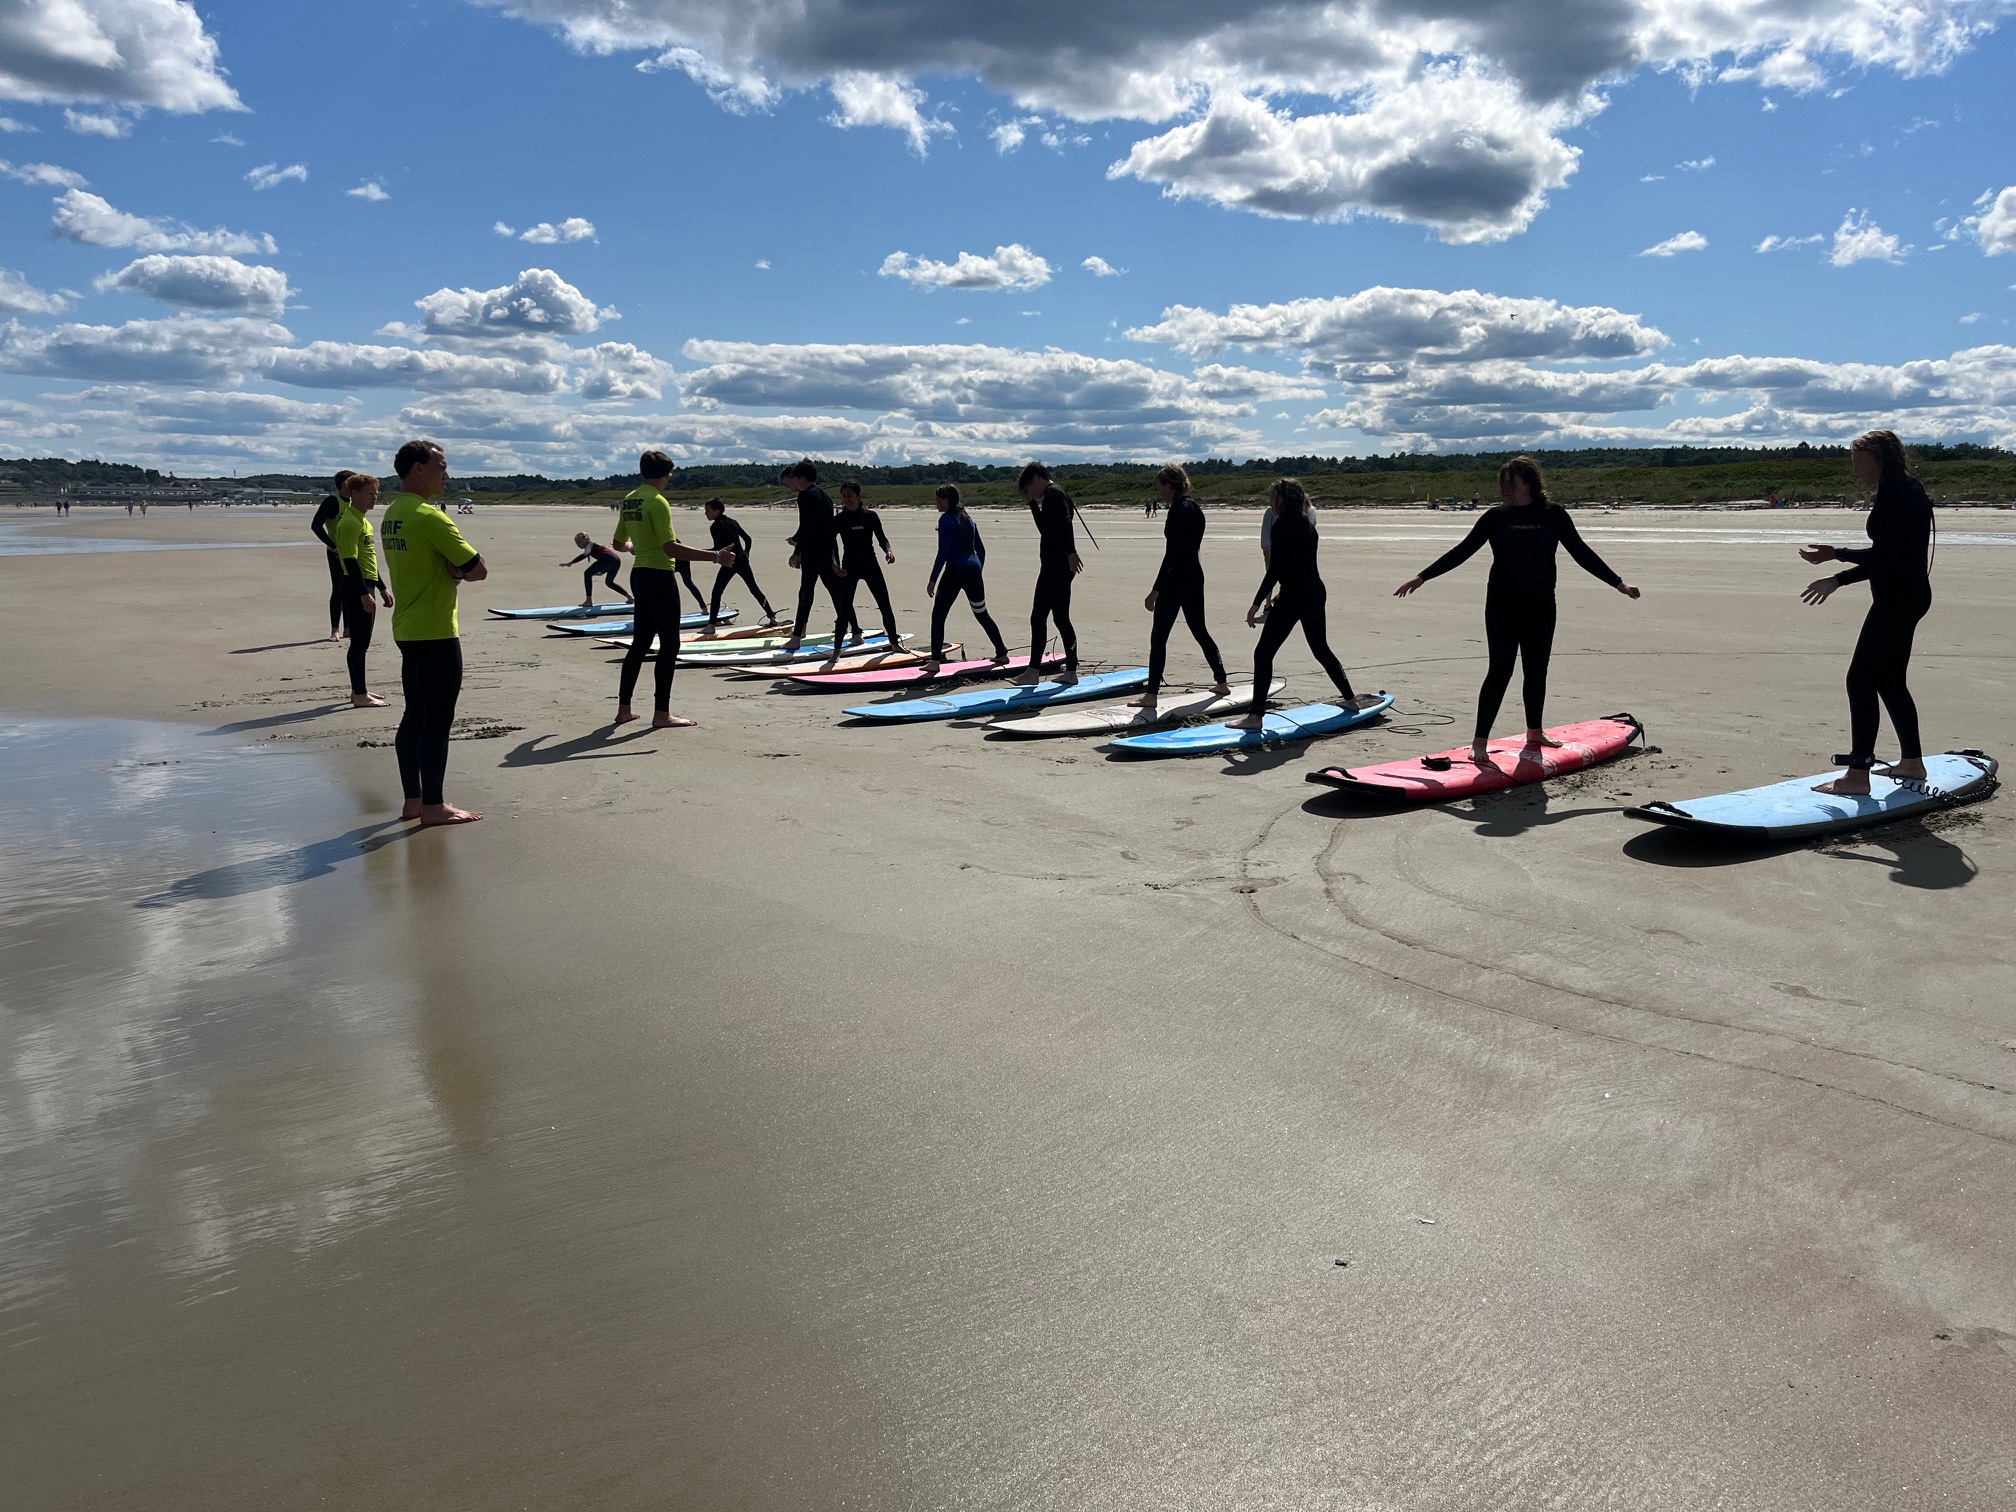 Before we head into the water, we'll show the kids the basics of paddling, both into the break and into the wave. It's also where we'll teach them how to get from their bellies onto their feet.